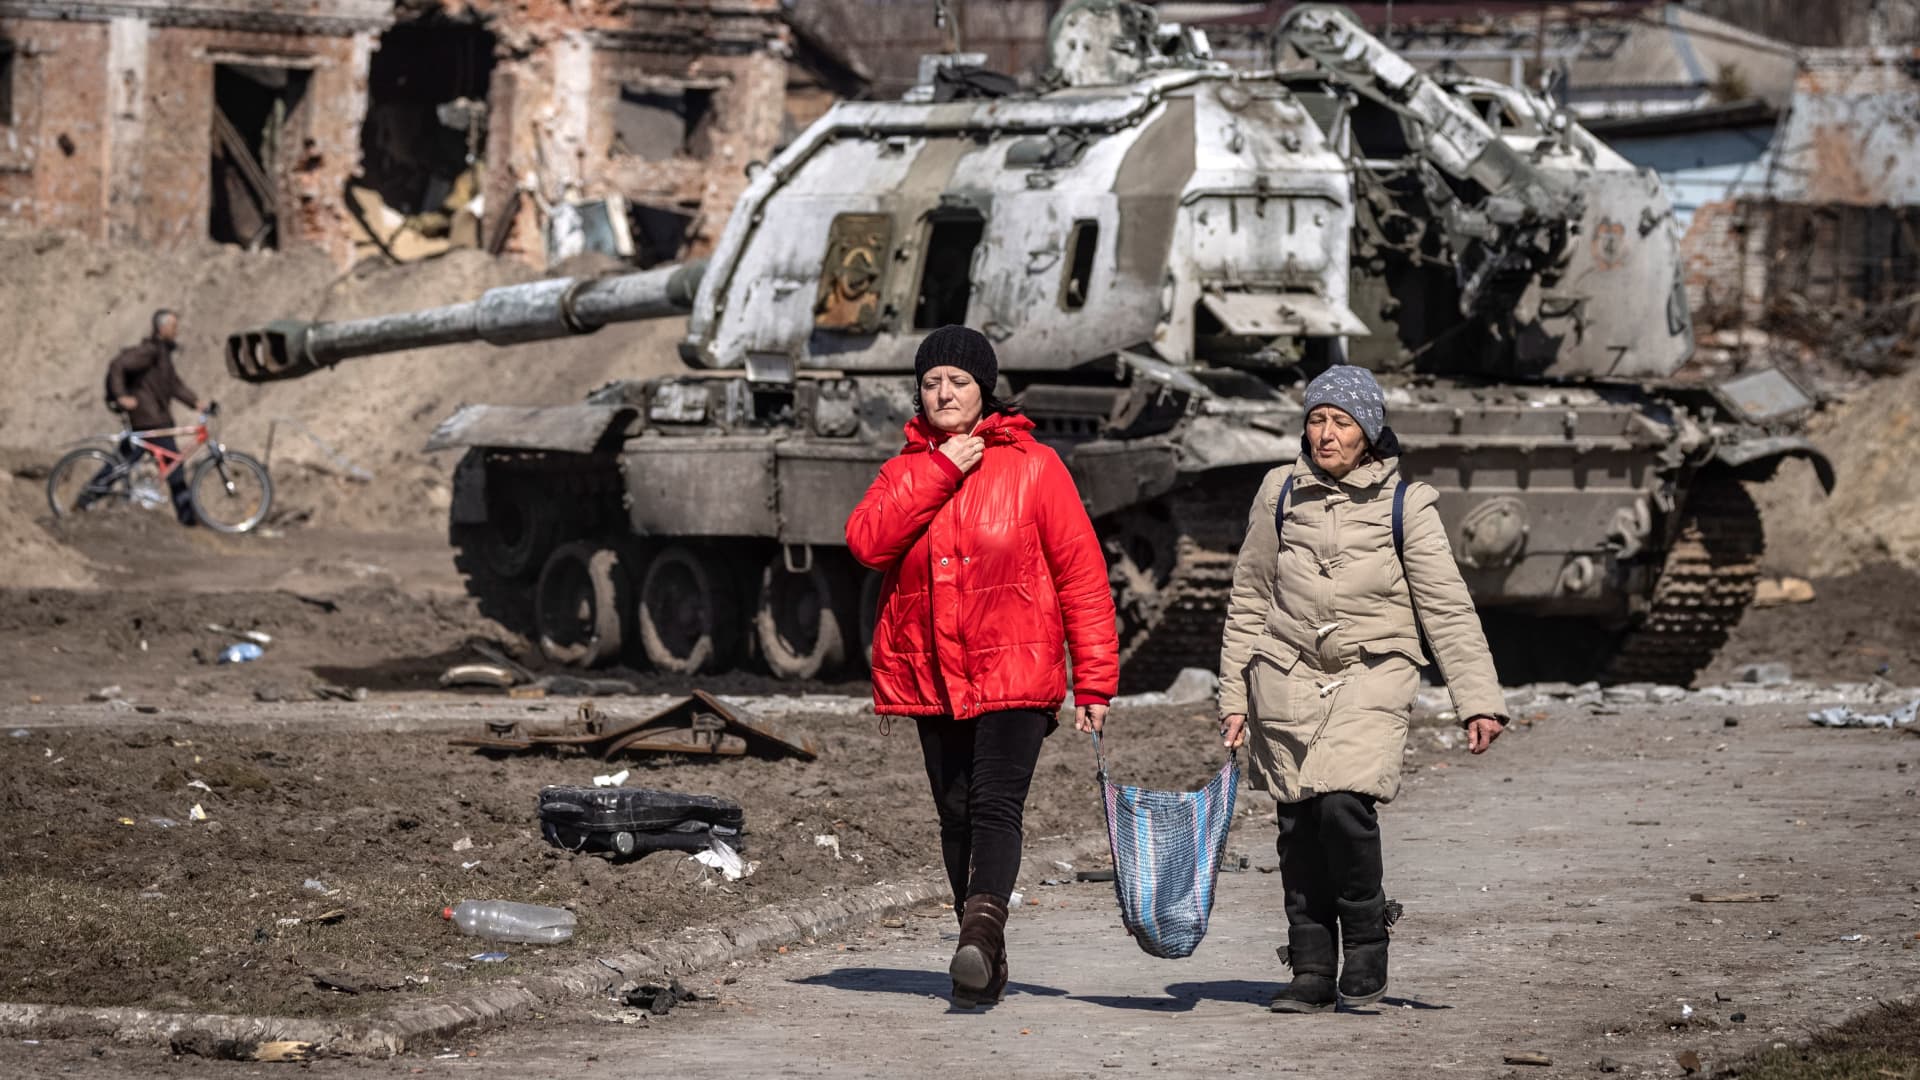 Residents walk past a damaged Russian military vehicle in the northeastern city of Trostianets, on March 29, 2022.